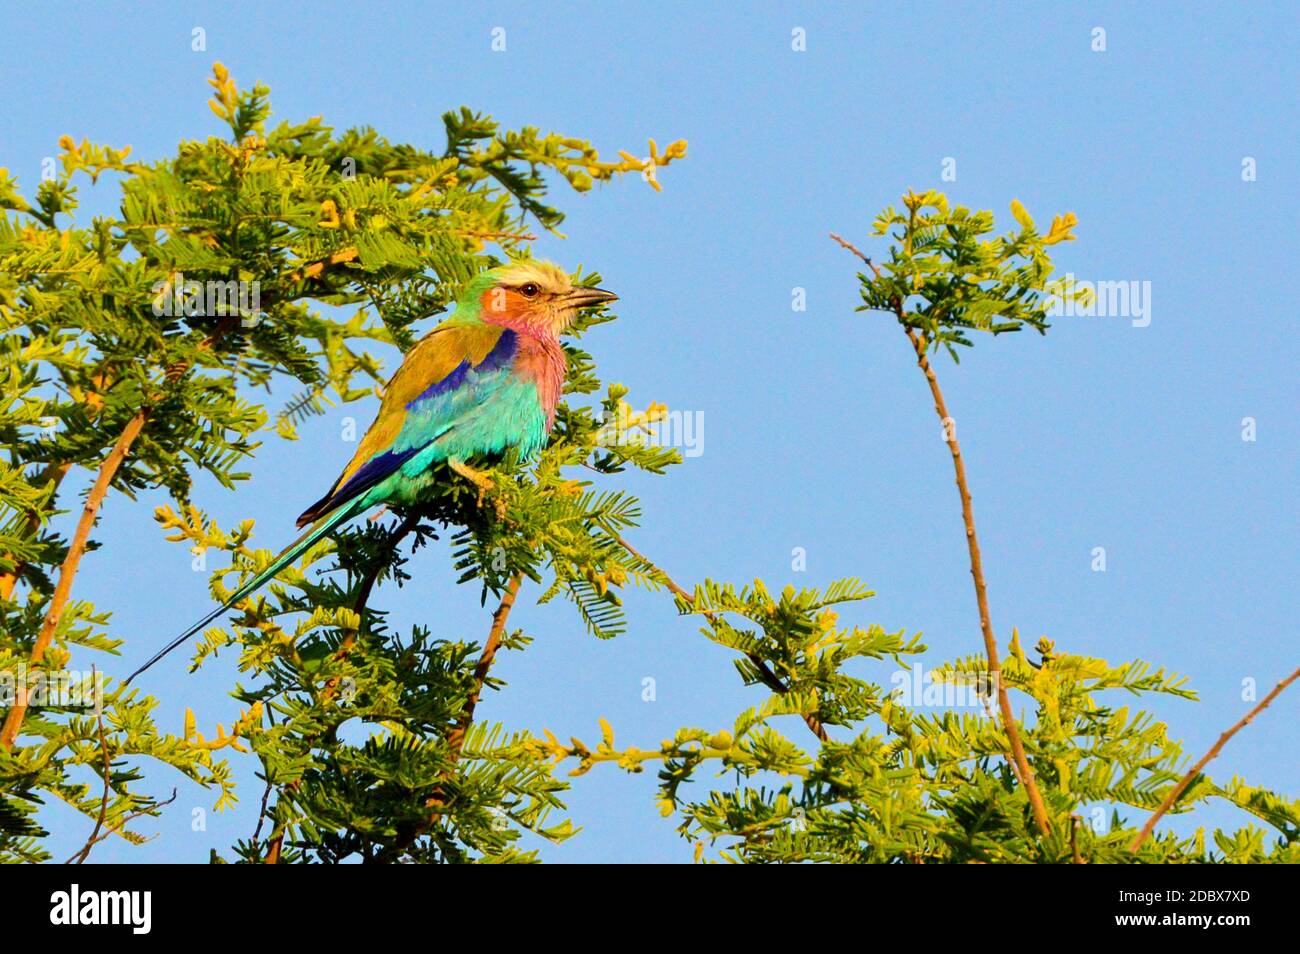 lilac-breasted roller in Kruger National Park, South Africa Stock Photo